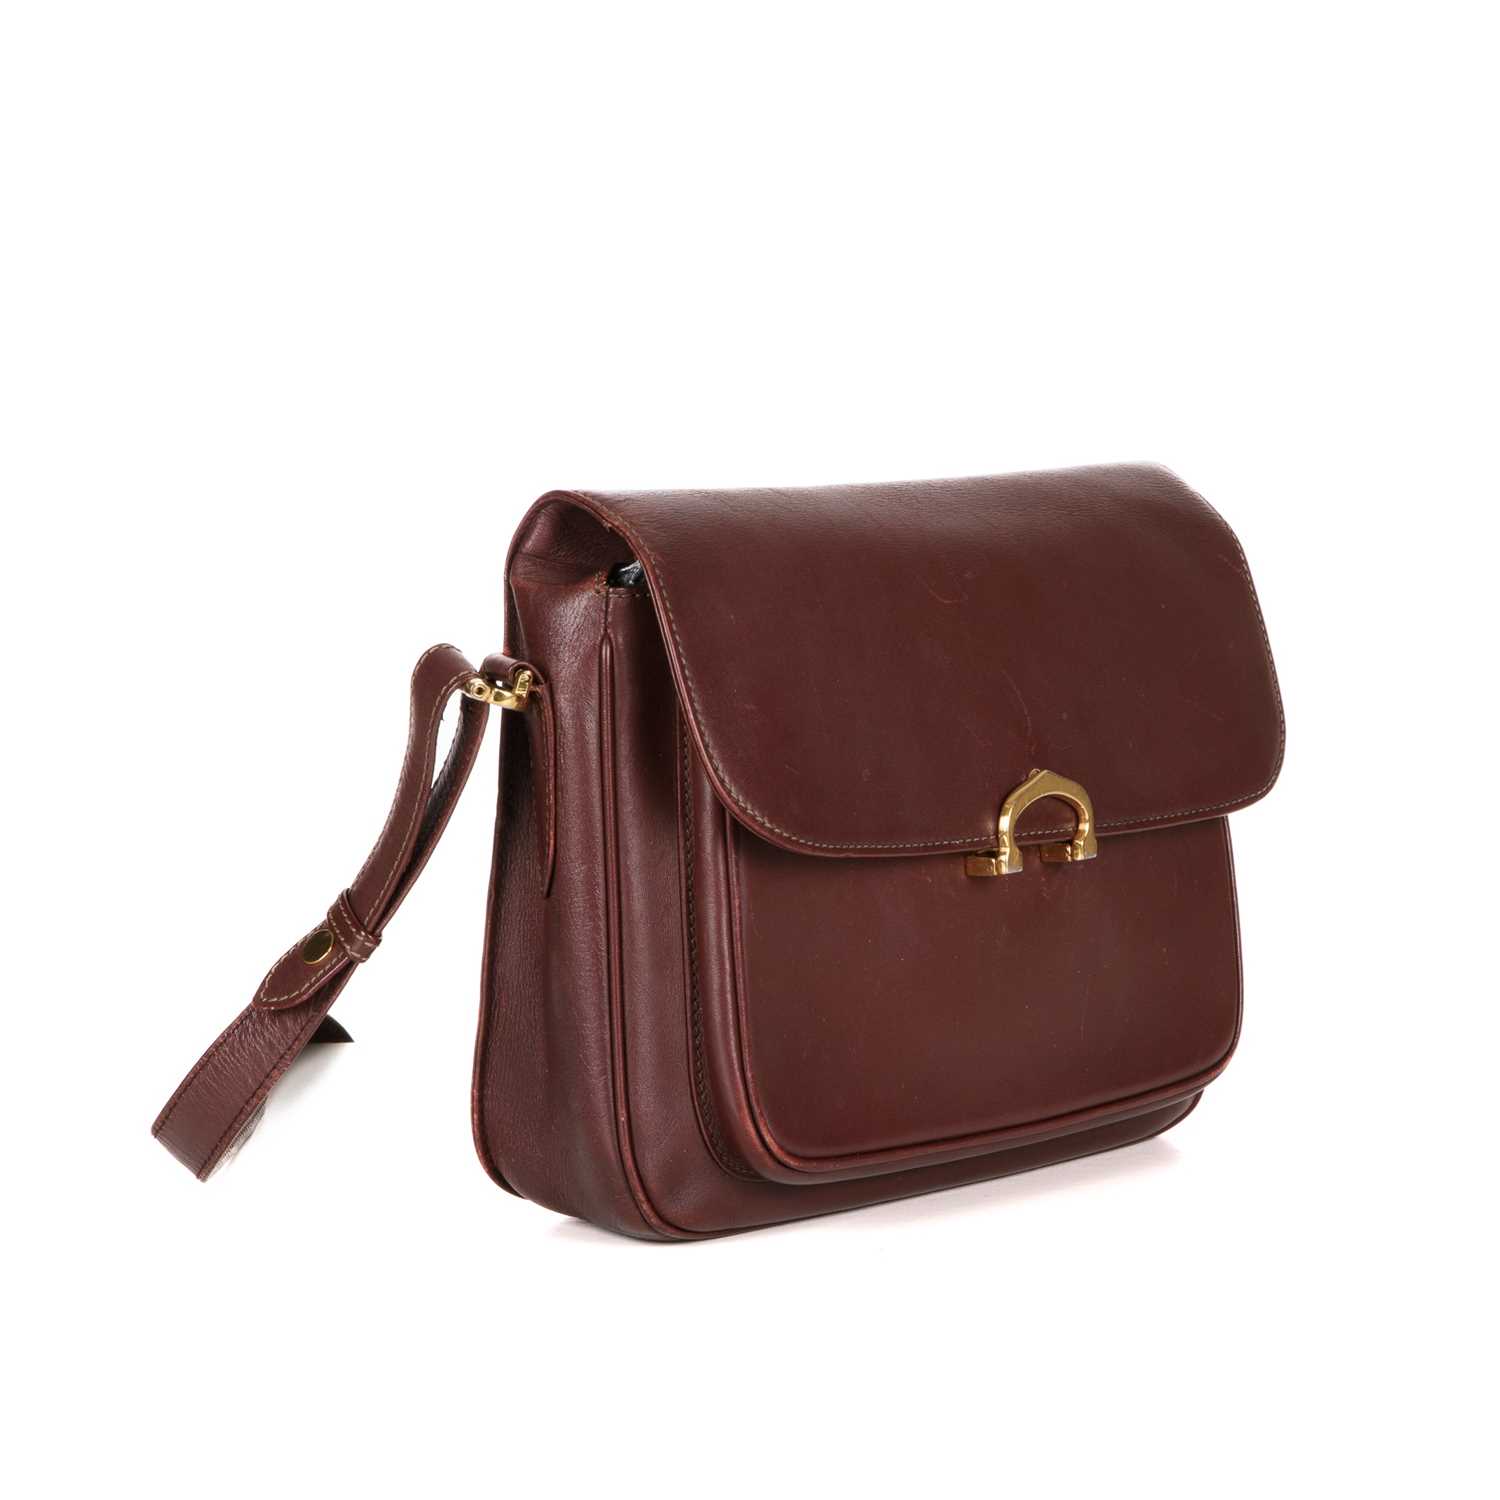 Cartier, a Bordeaux leather handbag, designed with a burgundy leather exterior, featuring gold- - Image 3 of 4